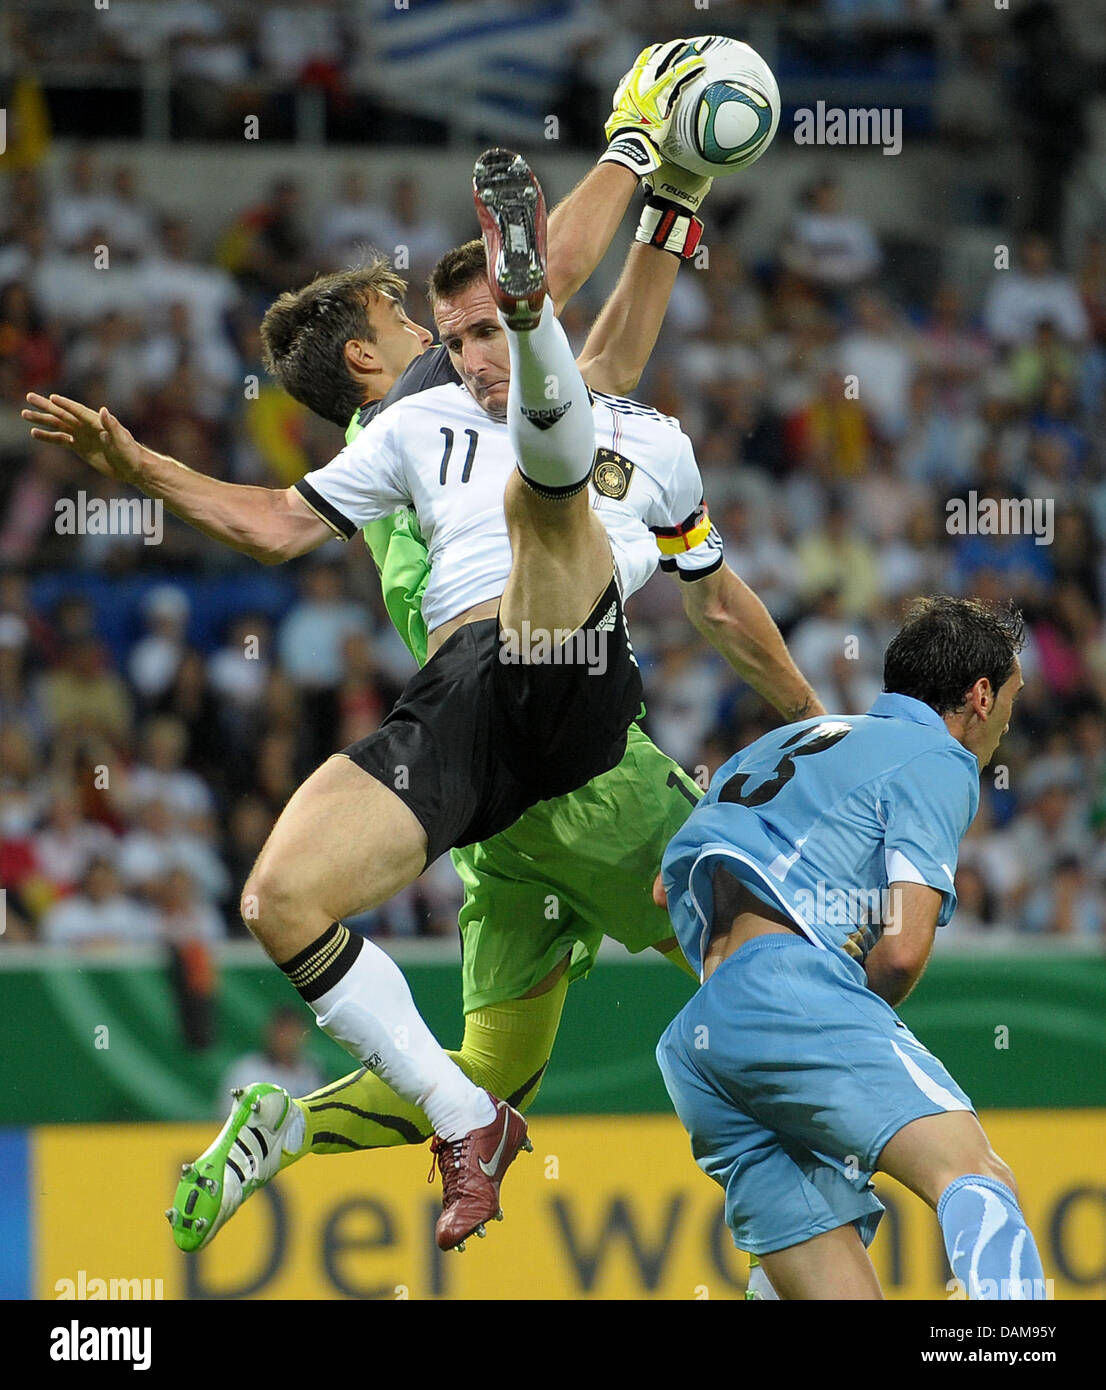 Germany's Miroslav Klose (front) and Goalkeeper Fernando Muslera of Uruguay  vie for the ball during the soccer friendly Germany vs. Uruguay at  Rhein-Neckar-Arena in Sinsheim, Germany, 29 May 2011. Germany won the